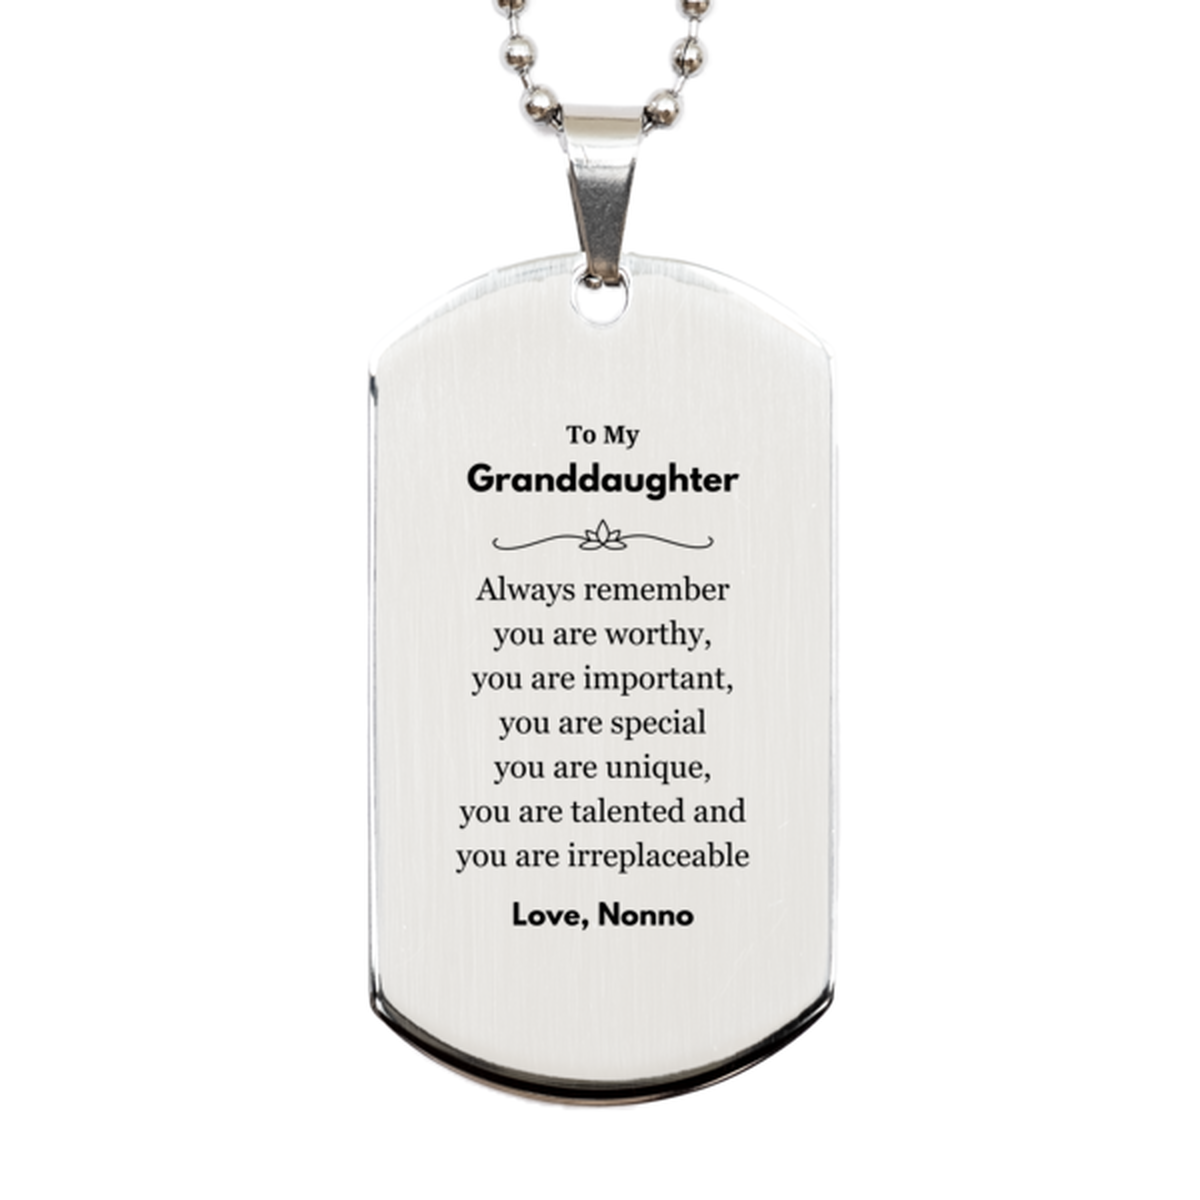 Granddaughter Birthday Gifts from Nonno, Inspirational Silver Dog Tag for Granddaughter Christmas Graduation Gifts for Granddaughter Always remember you are worthy, you are important. Love, Nonno